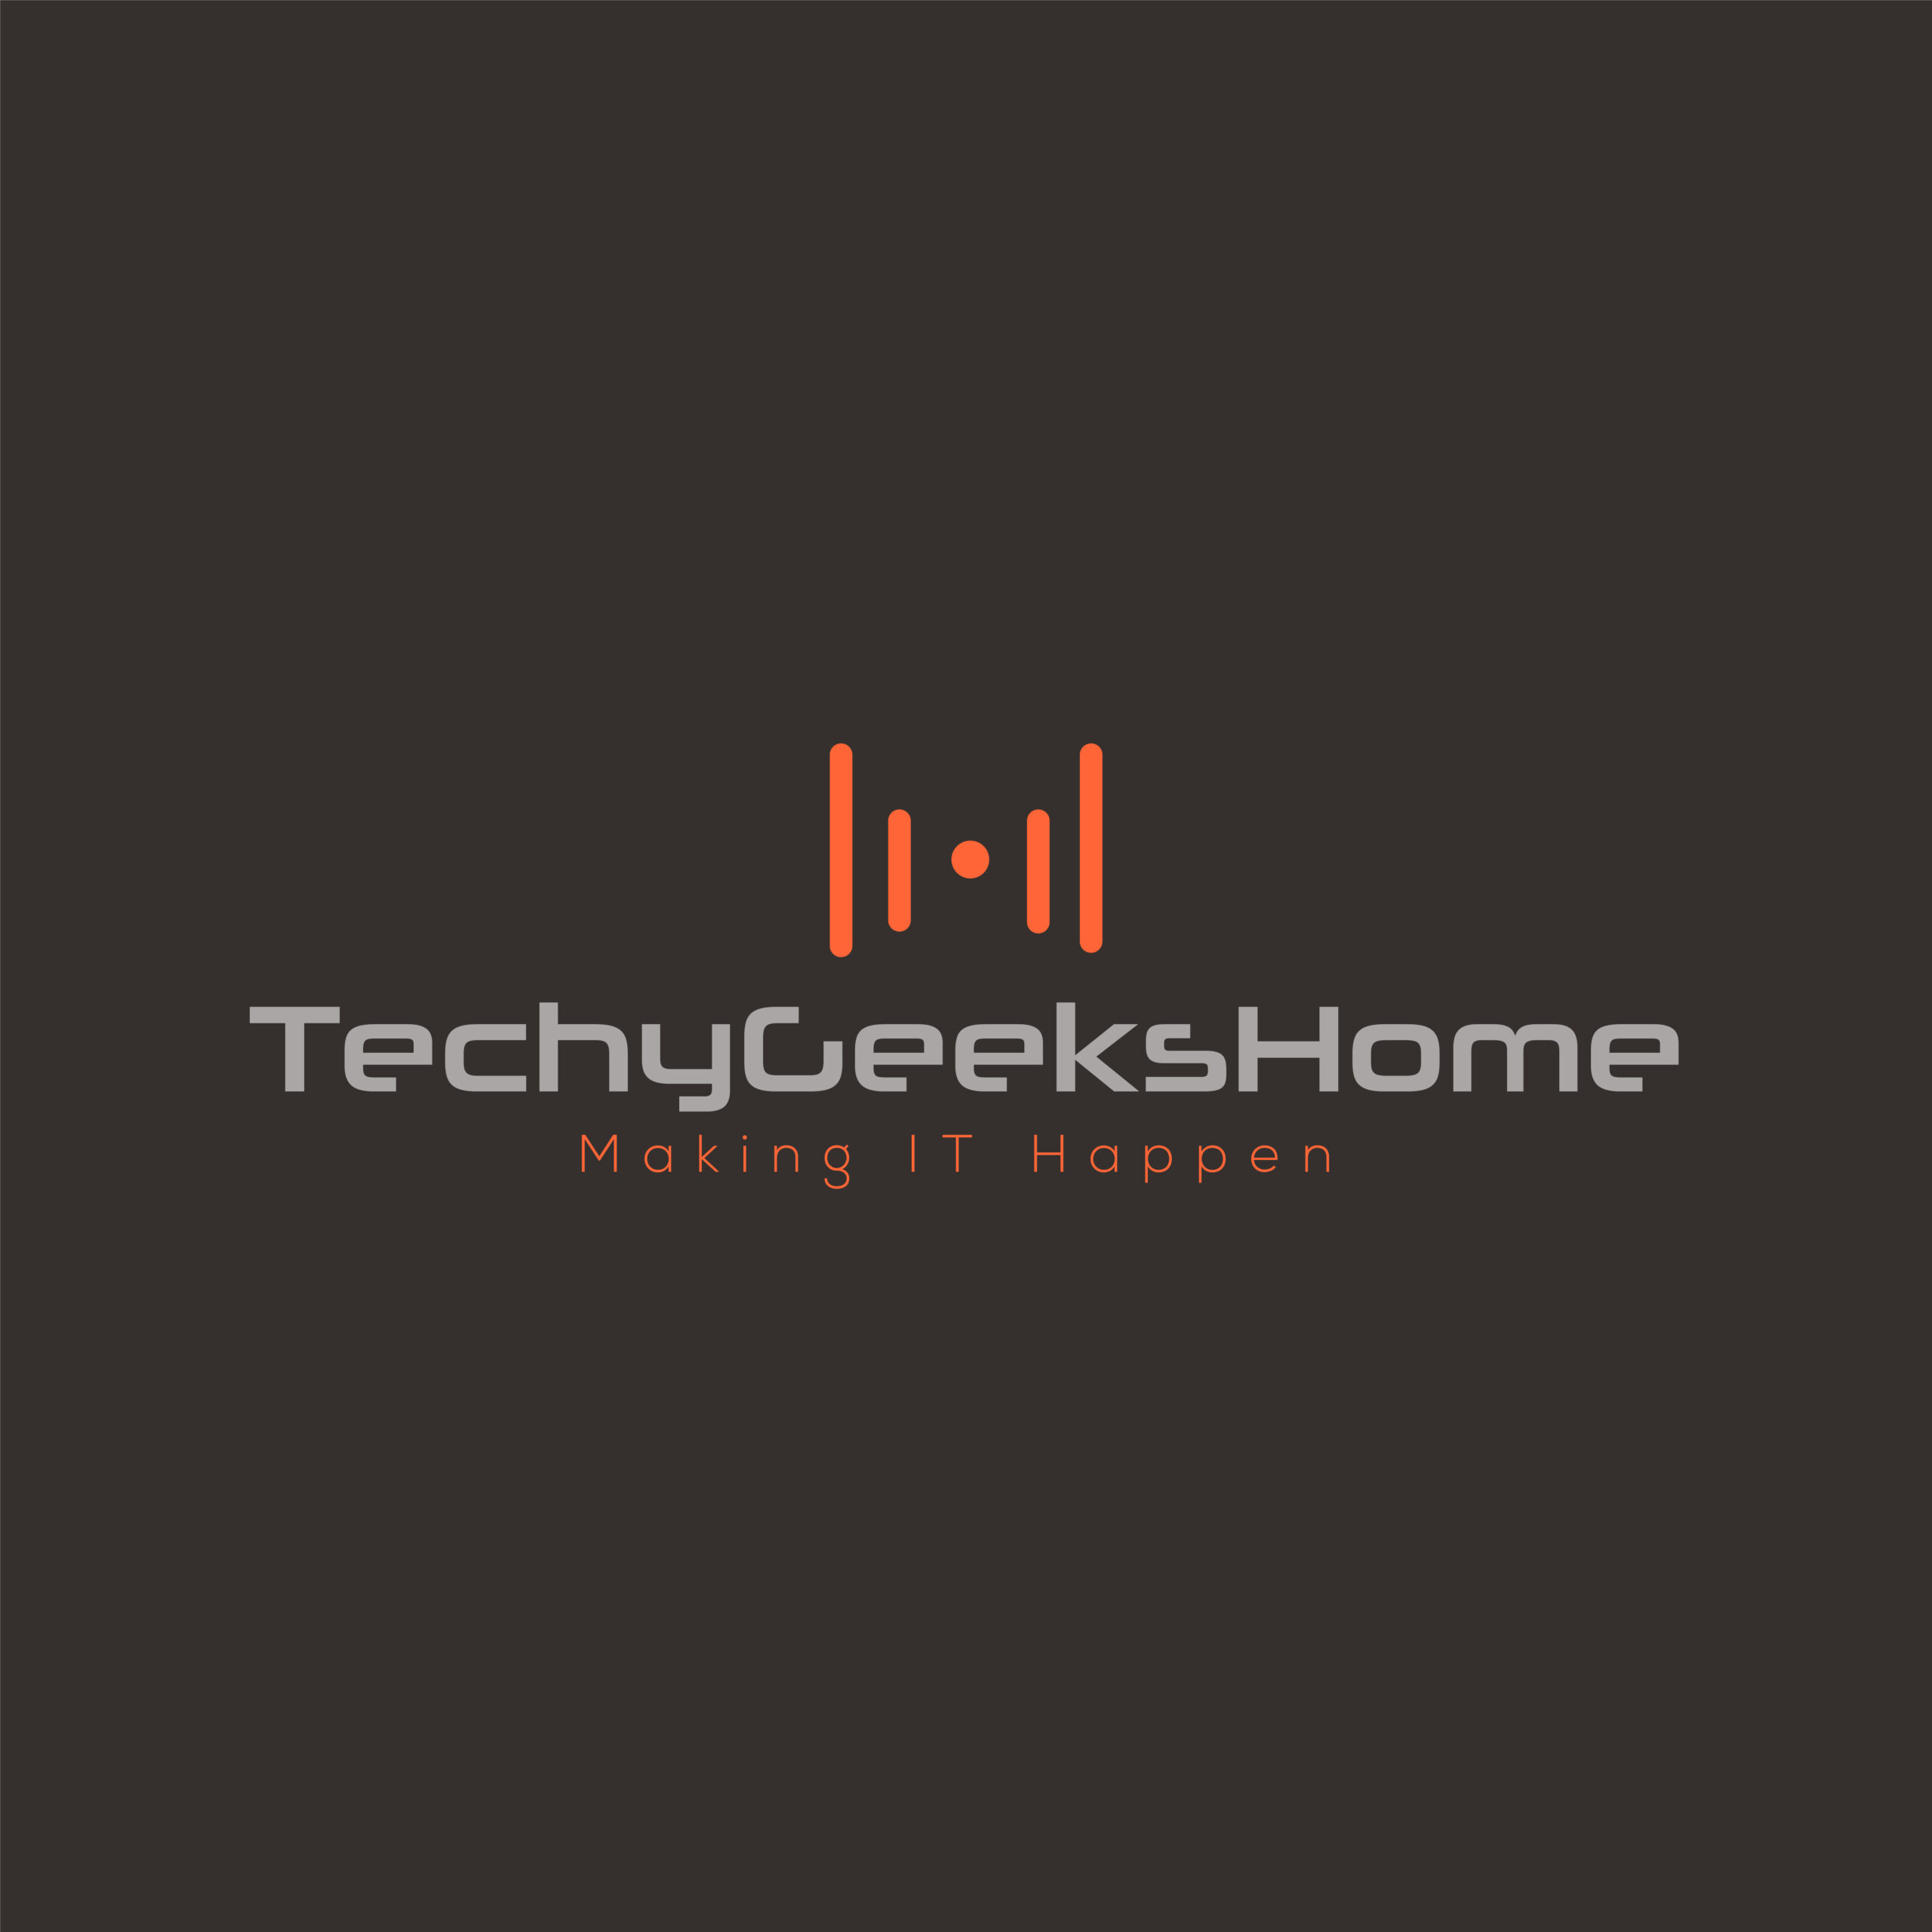 Logo of techygeekshome featuring an orange graphic resembling a sound wave above the stylized text, set against a black background with the tagline "making it happen" below.